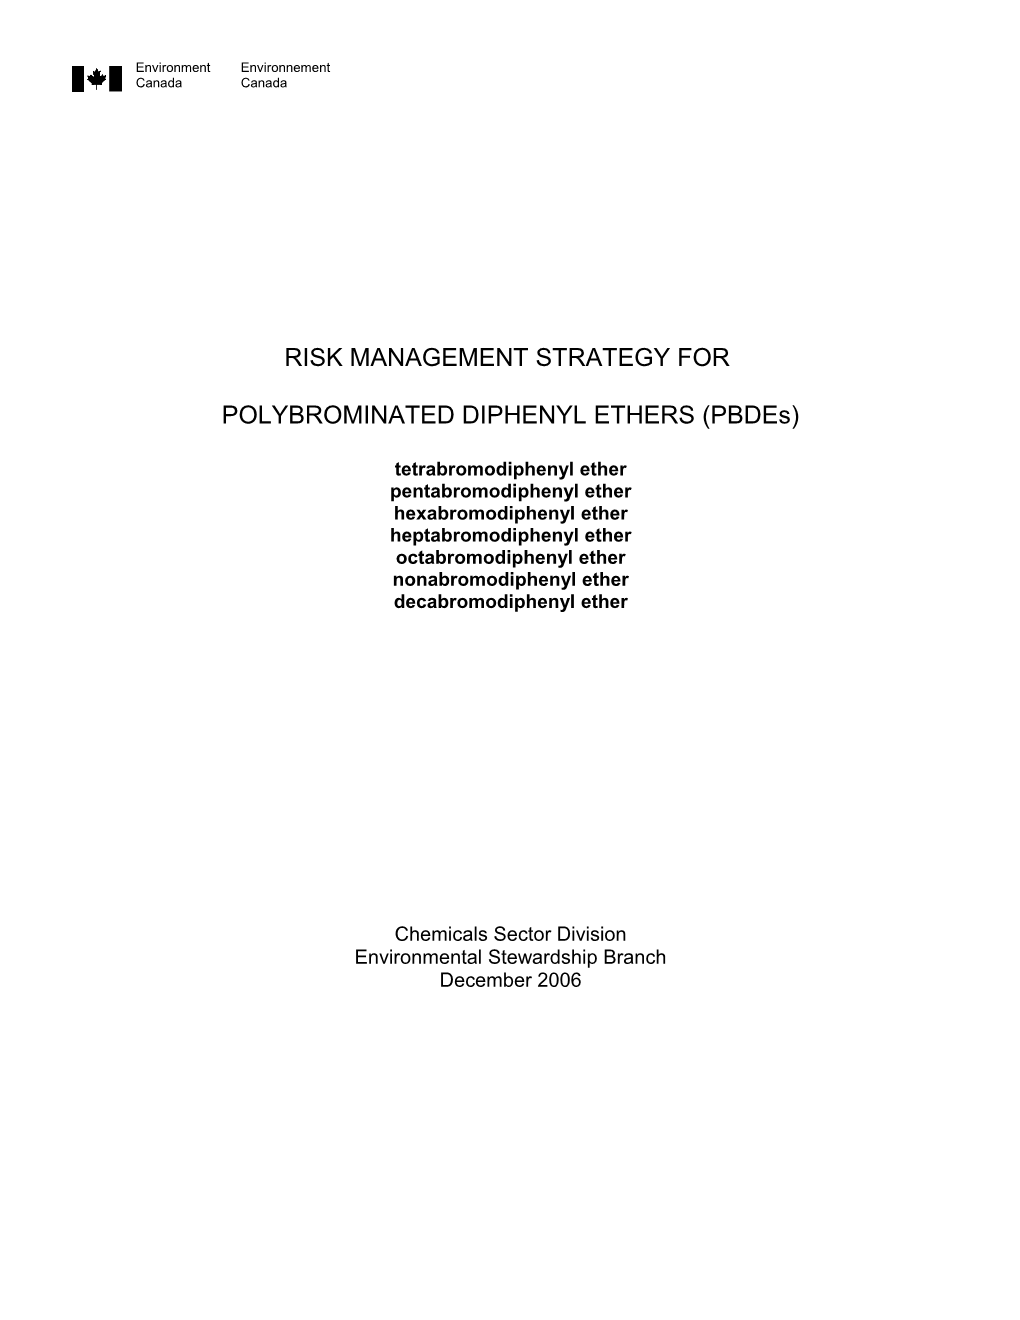 Risk Management Strategy for Polbrominated Diphenyl Ethers (PBDE)